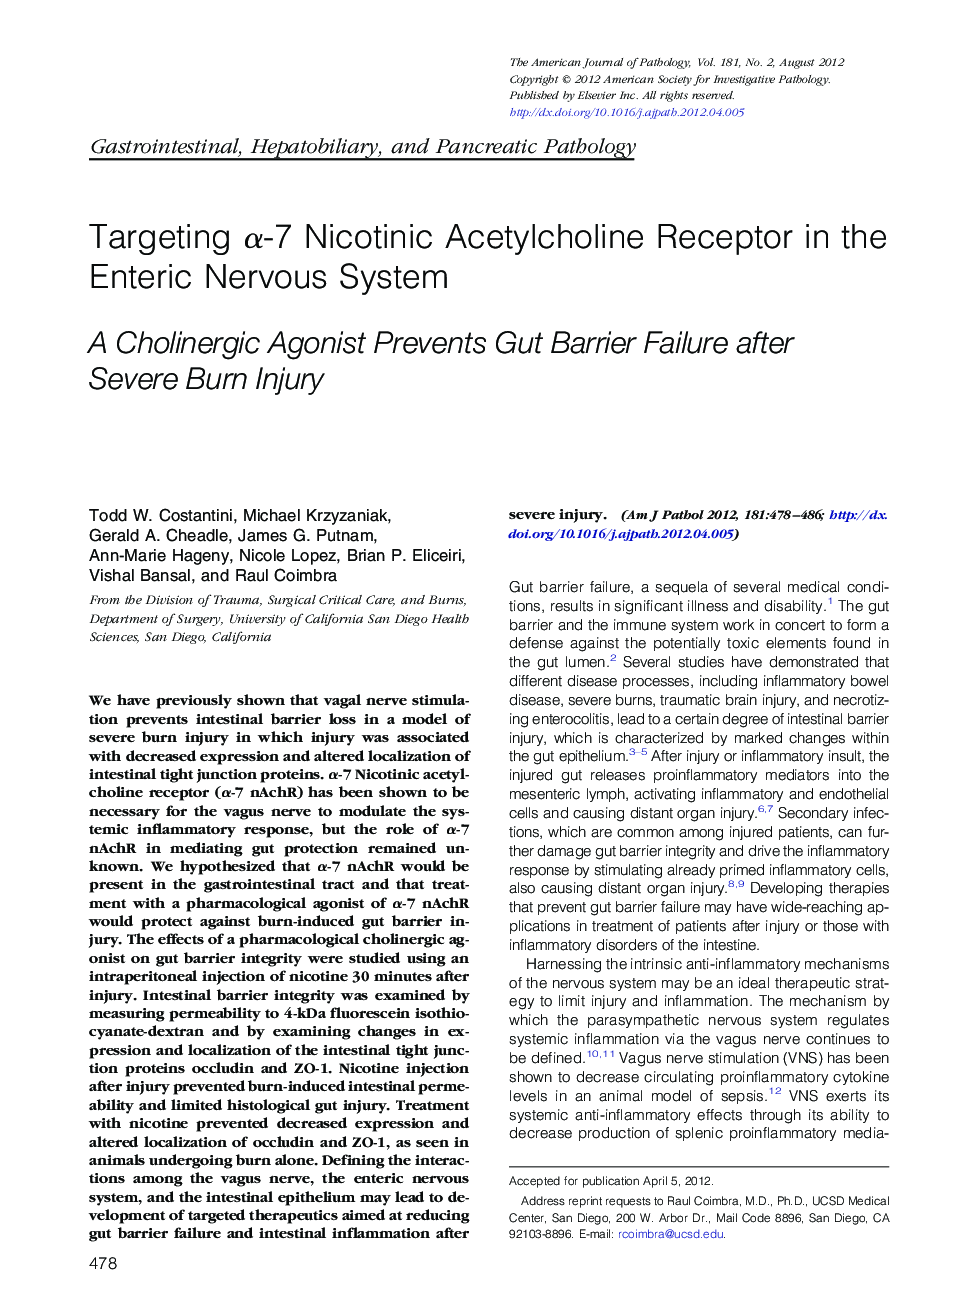 Regular articleGastrointestinal, hepatobiliary, and pancreatic pathologyTargeting Î±-7 Nicotinic Acetylcholine Receptor in the Enteric Nervous System: A Cholinergic Agonist Prevents Gut Barrier Failure after Severe Burn Injury